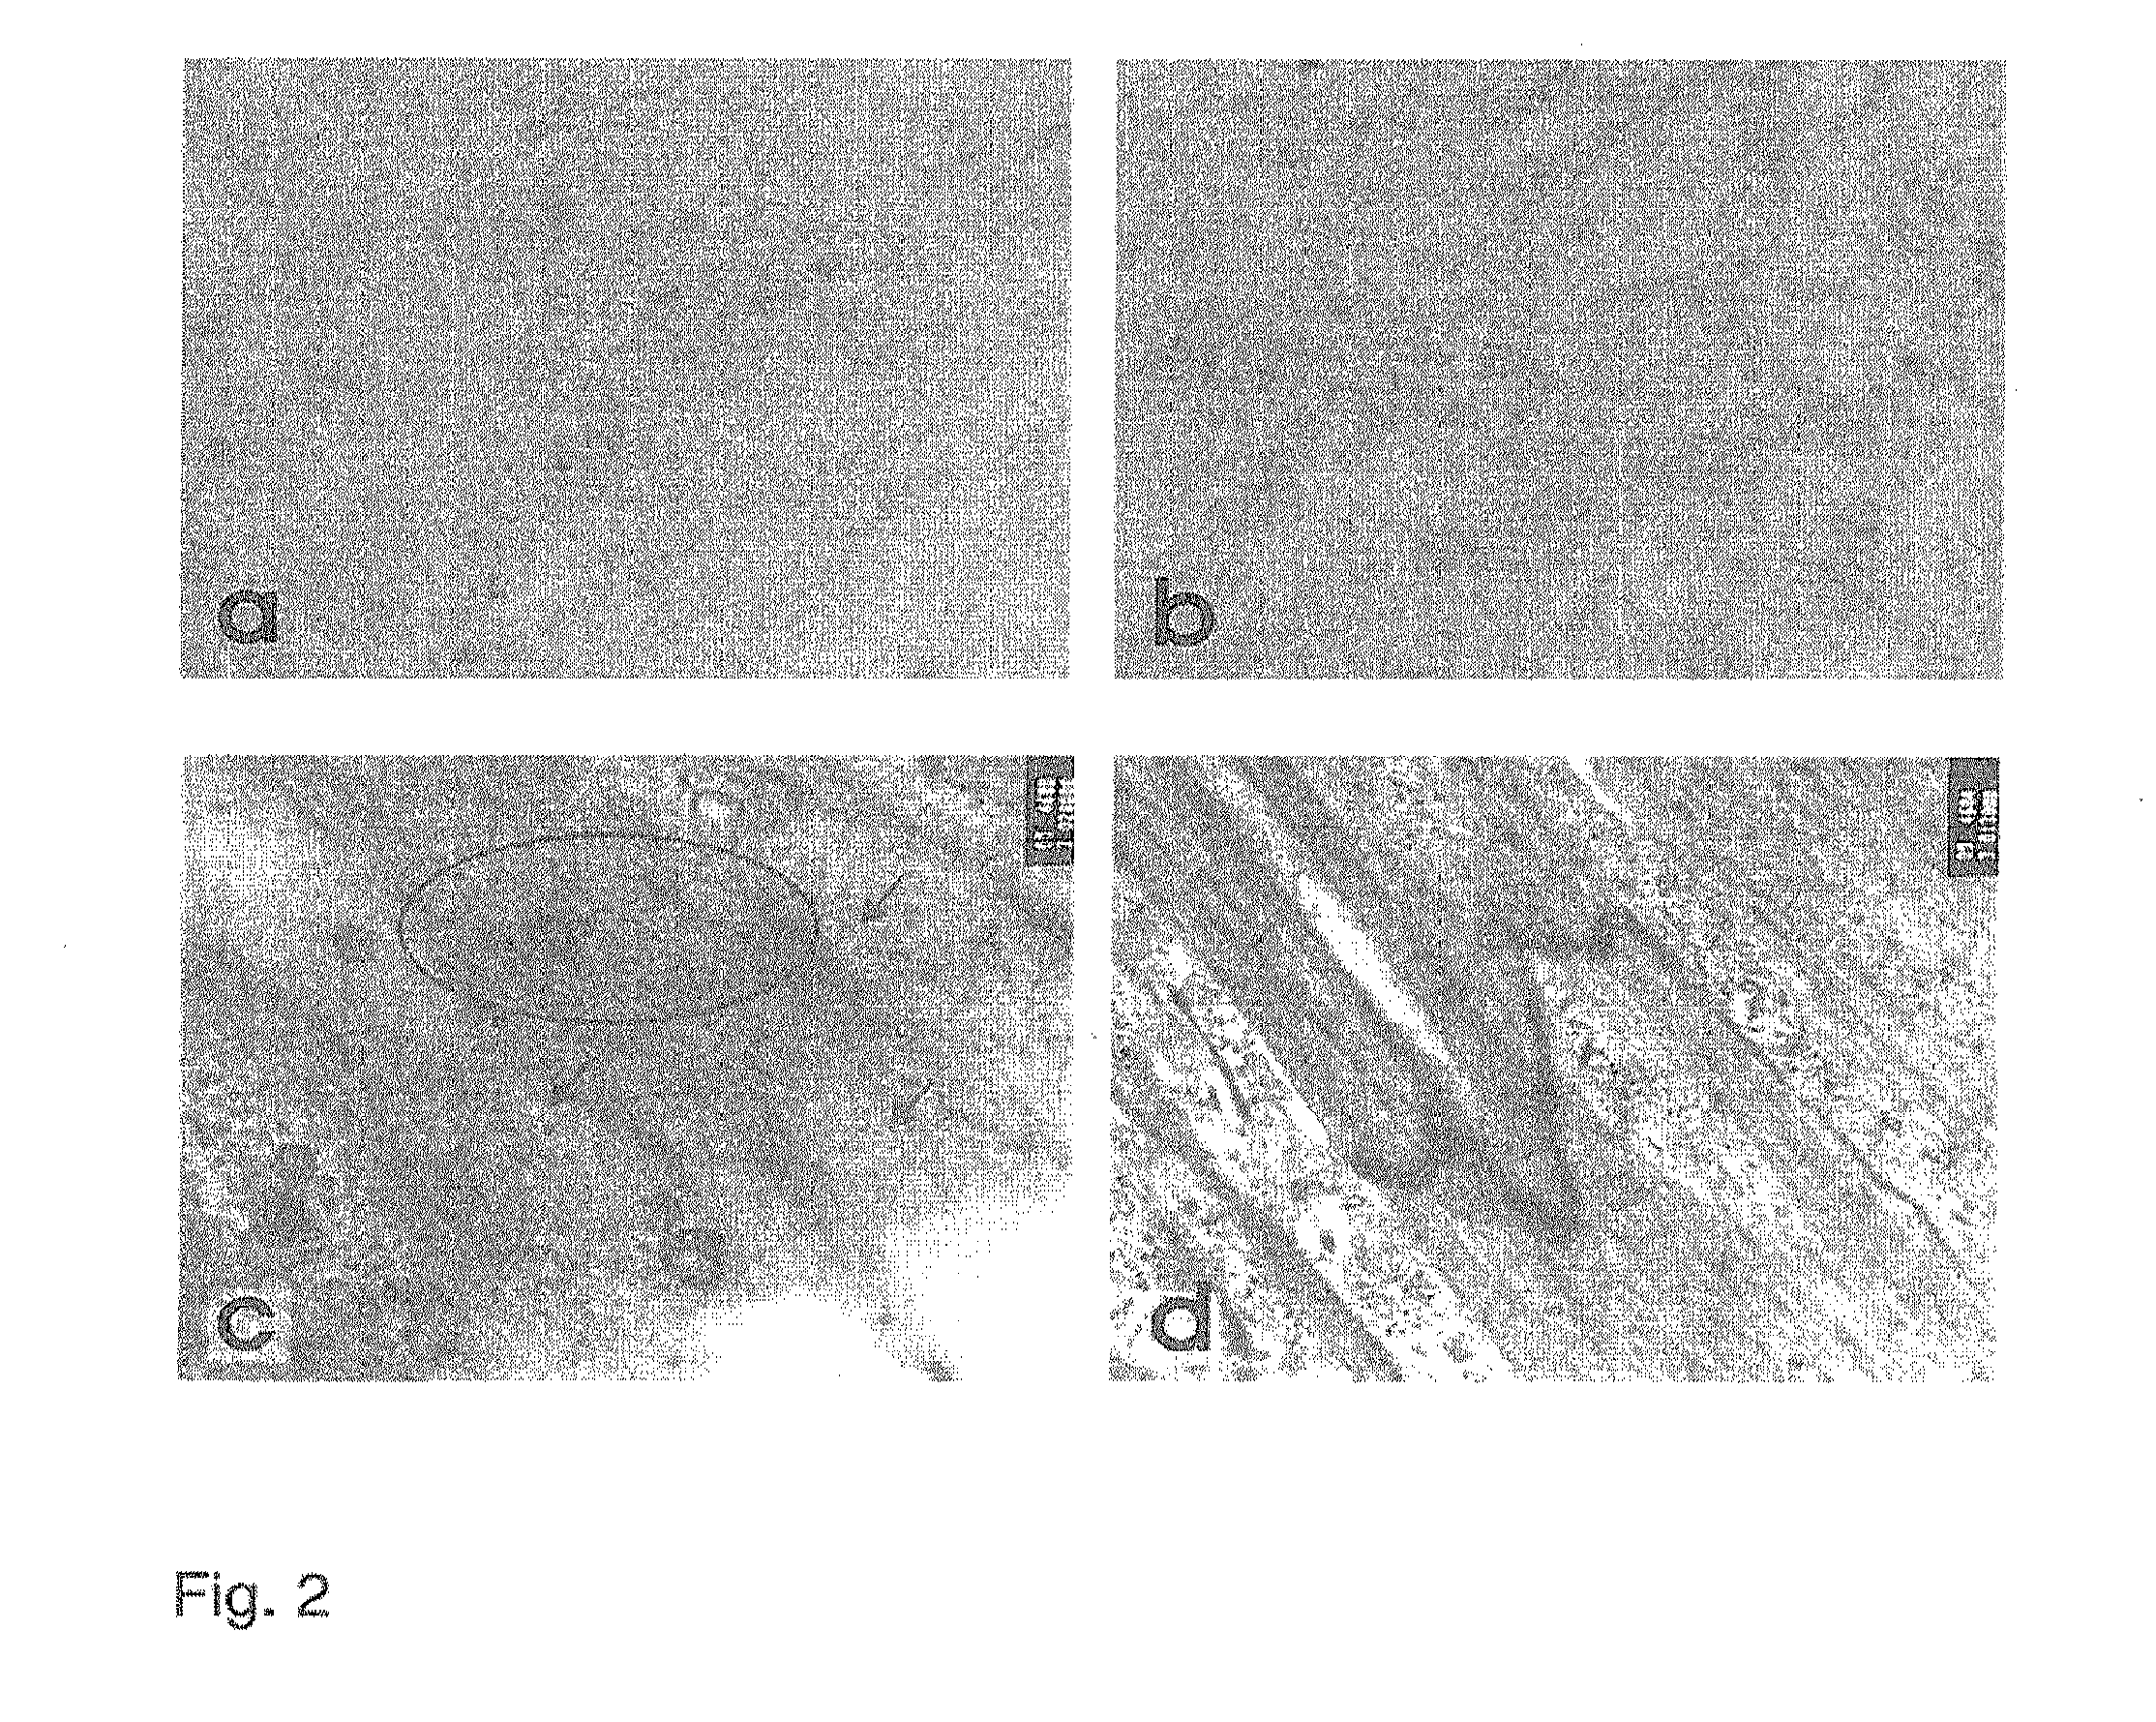 Method for producing autonomously contracting cardiac muscle cells from adult stem cells, in particular human adult stem cells